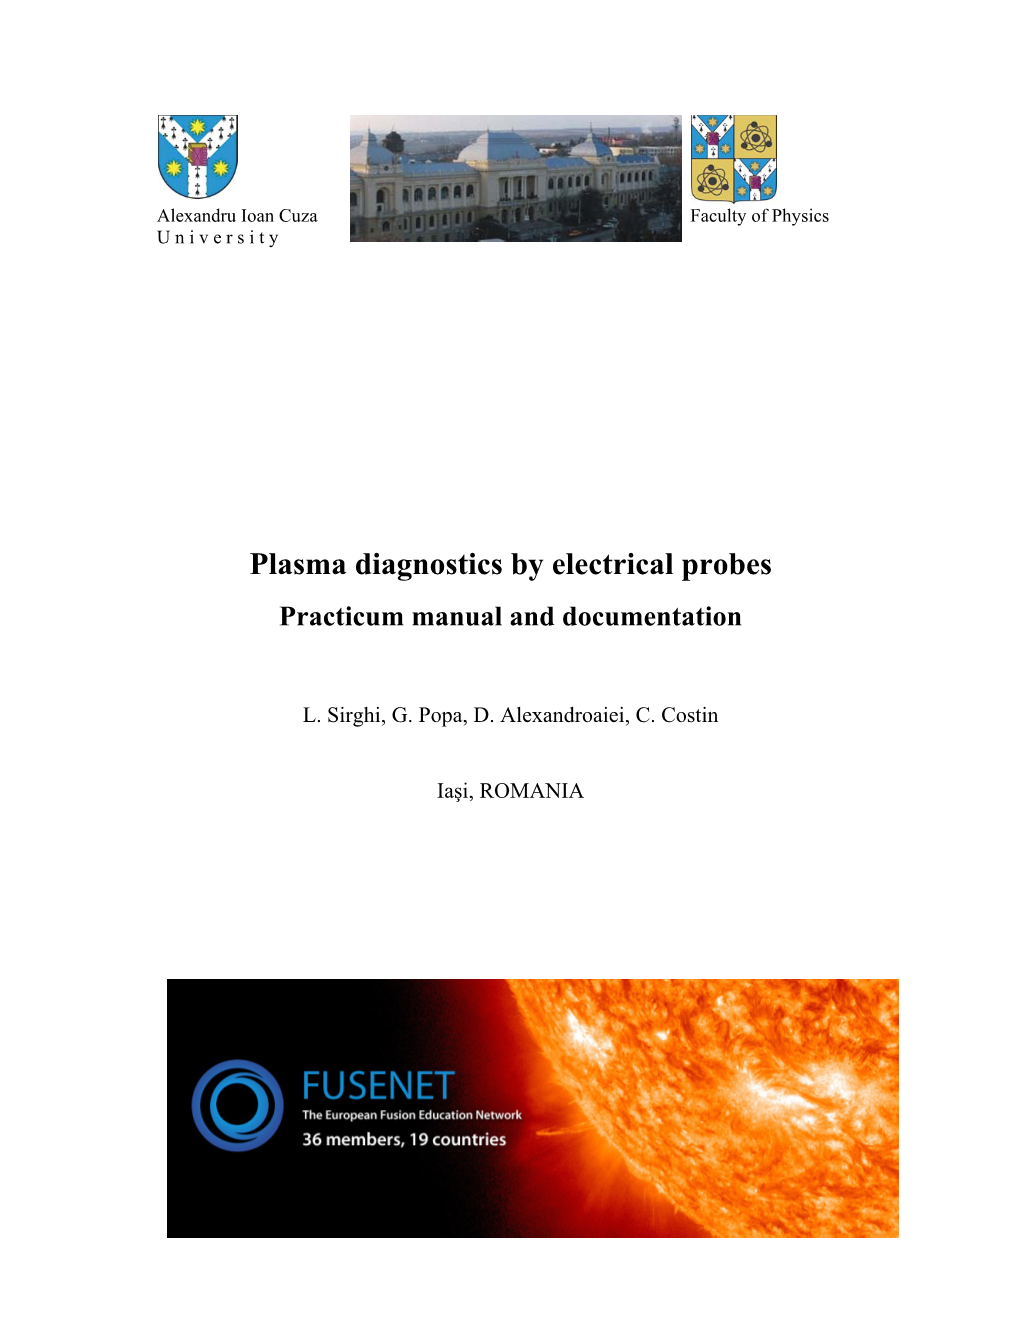 Plasma Diagnostics by Electrical Probes Practicum Manual and Documentation